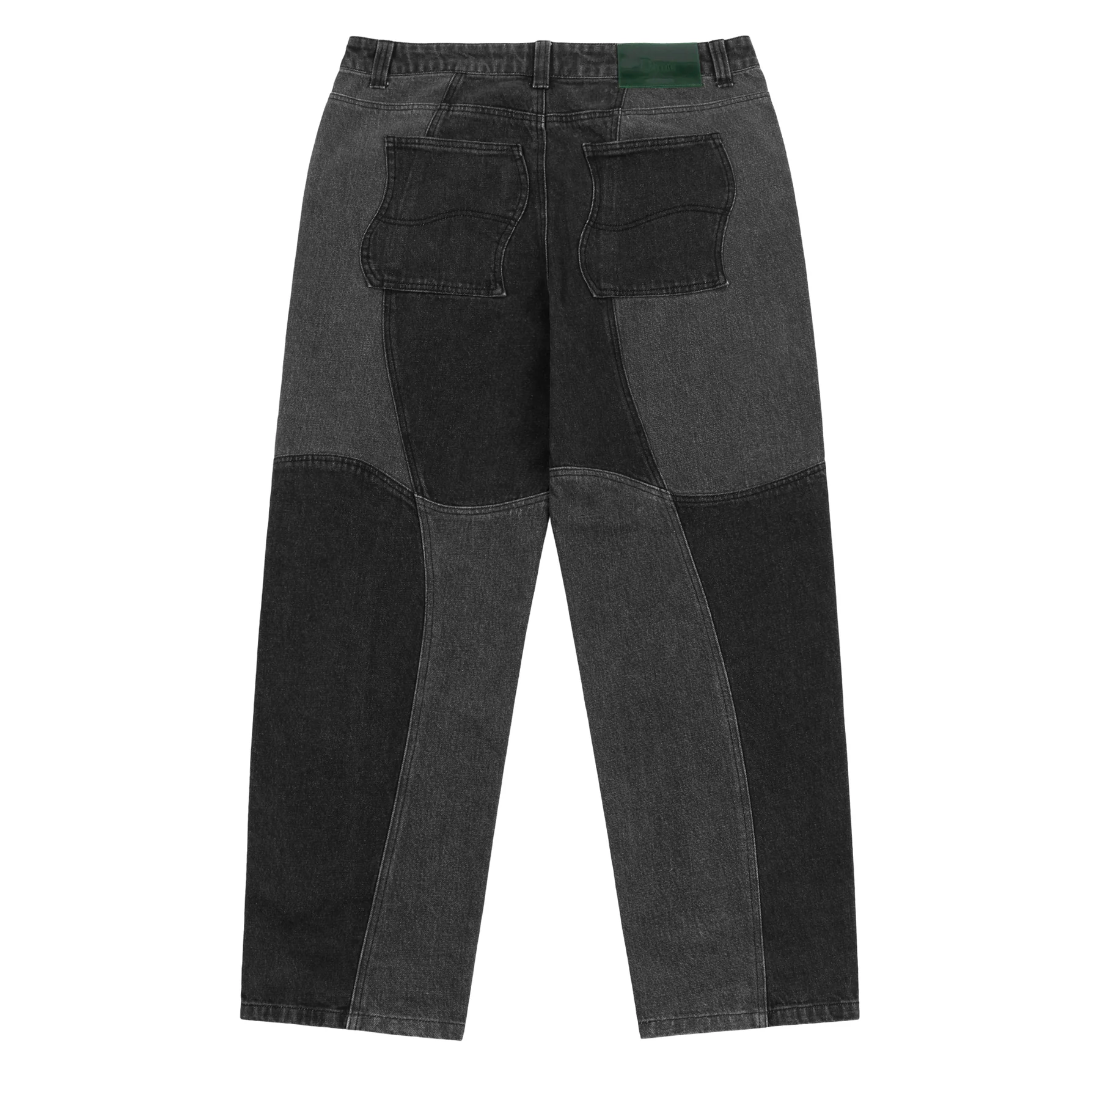 【Dime】Blocked Relaxed Denim Pants - Black washed